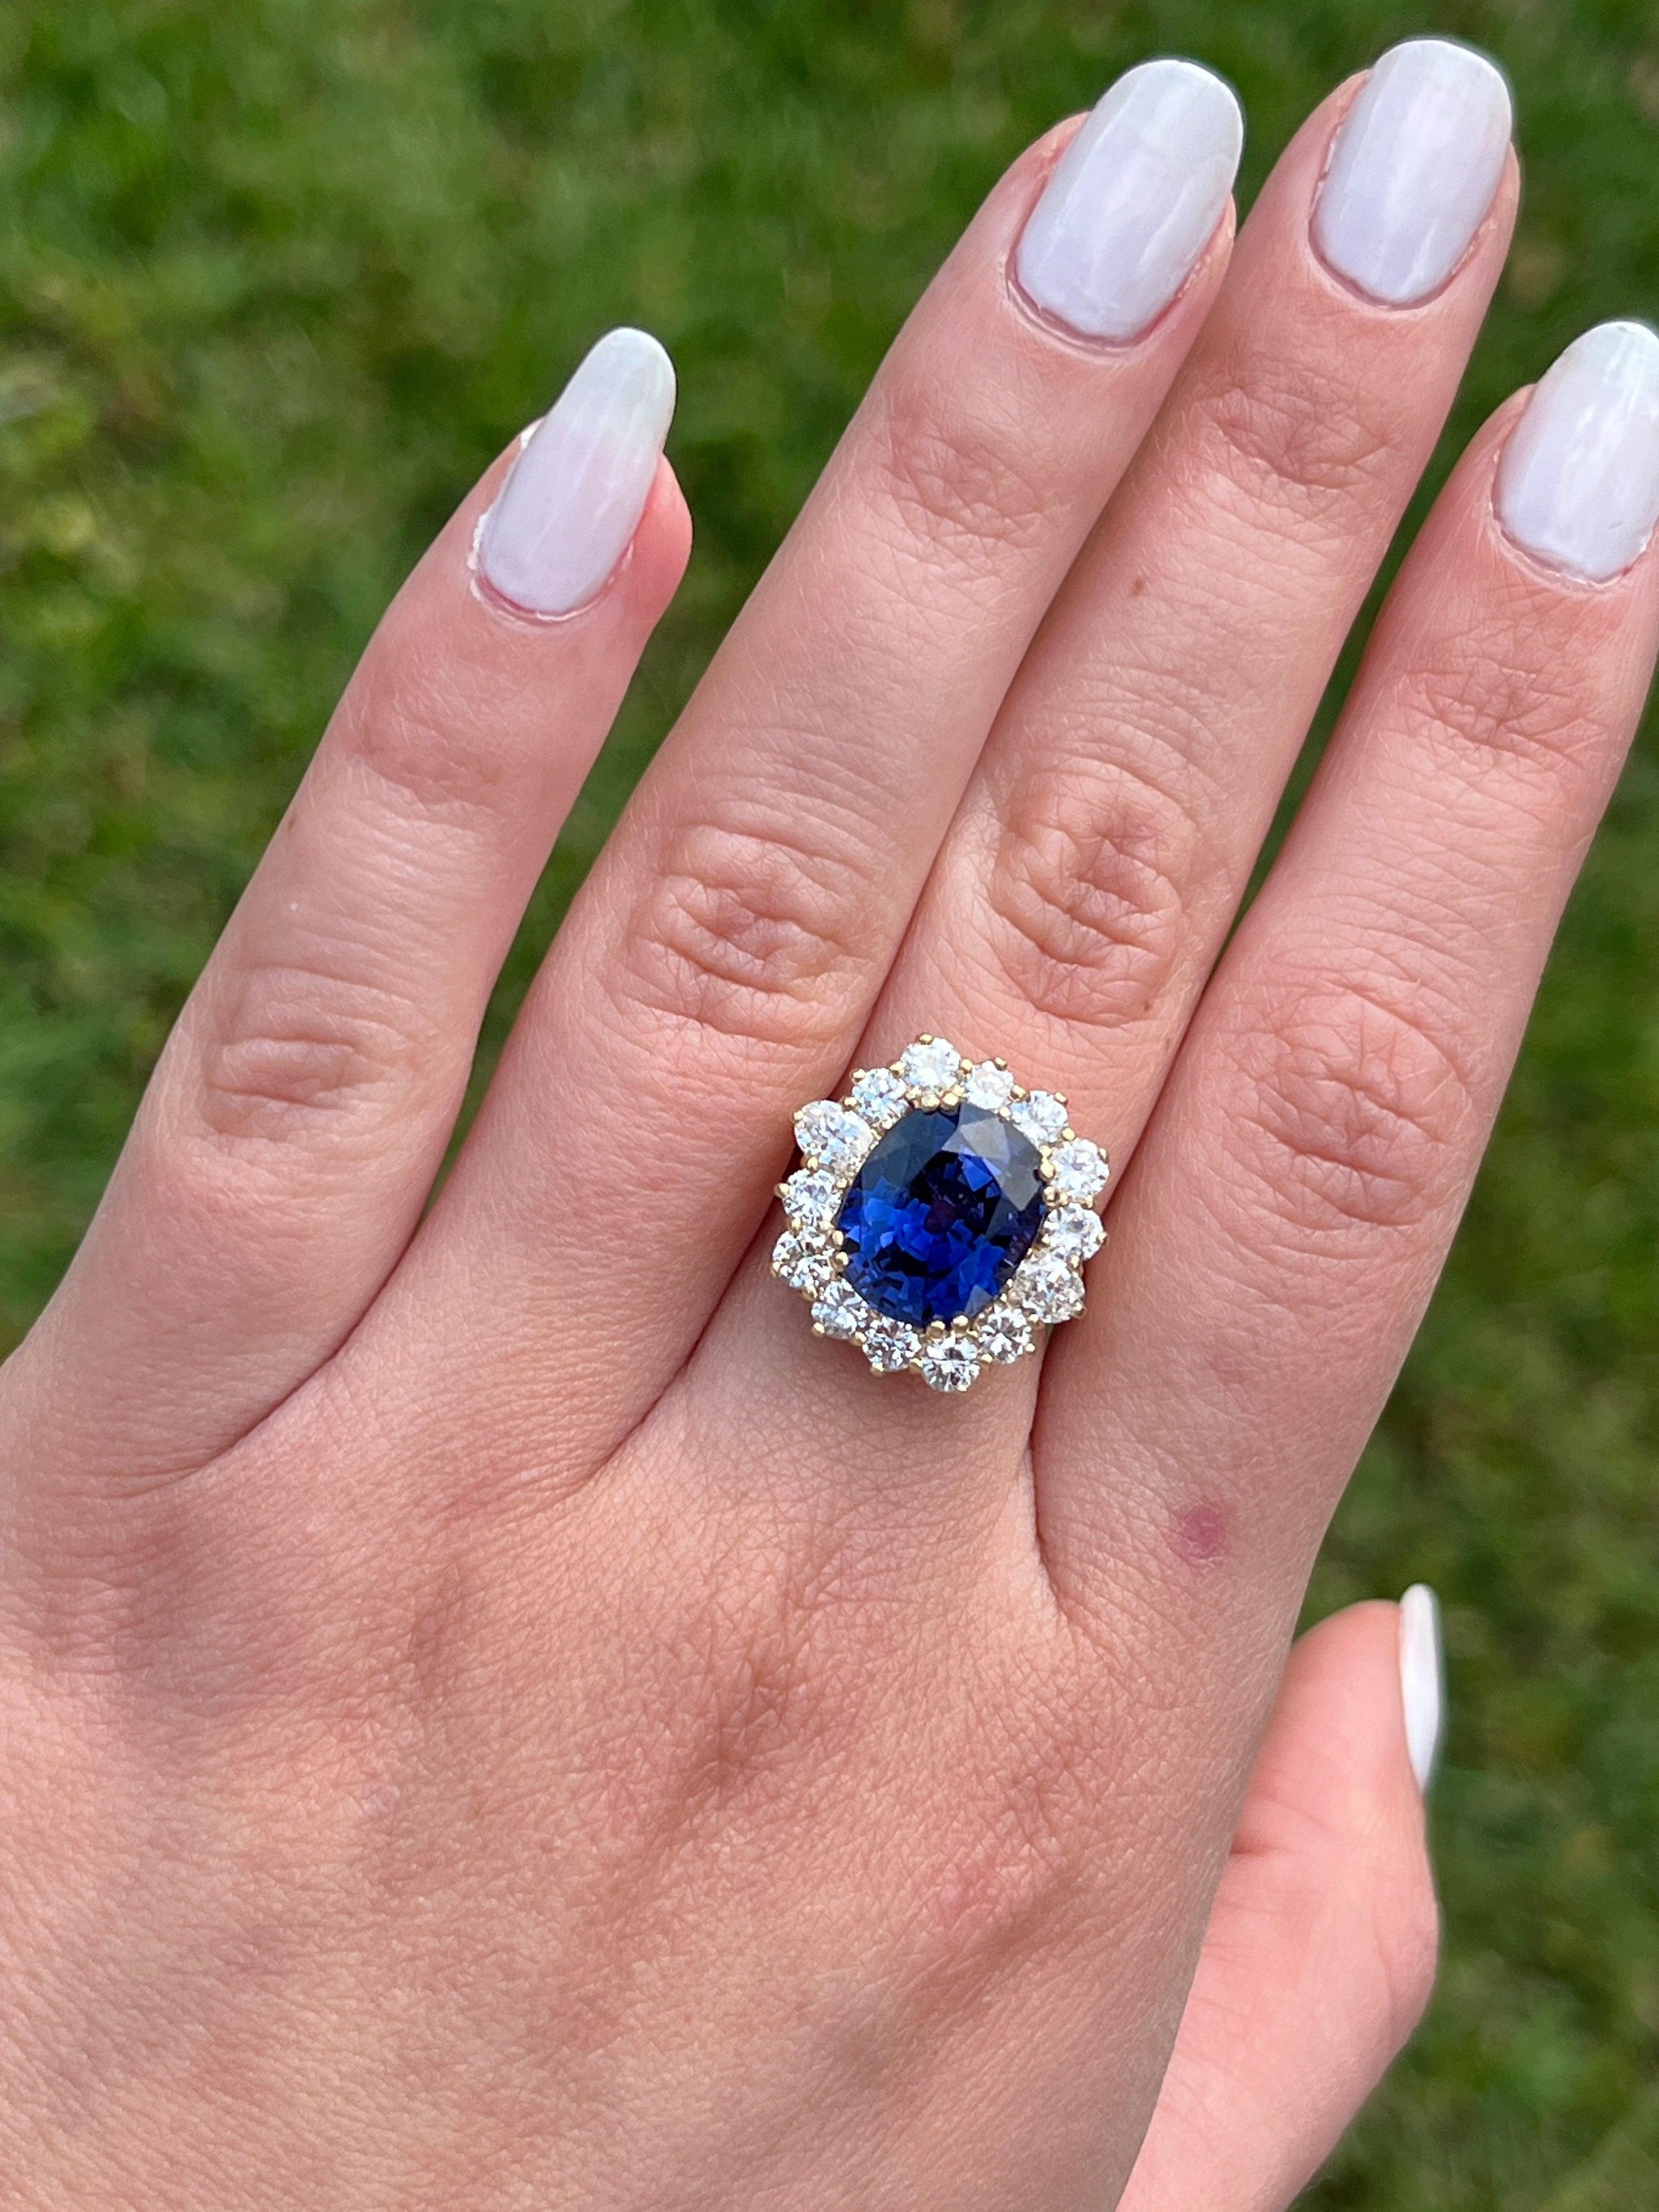 Natural Blue Sapphire Engagement Ring in 14k Gold / Pear Shape Genuine  Sapphire Diamond Ring Available in Gold, Rose Gold, and White GoldVV - Gems  N Diamond